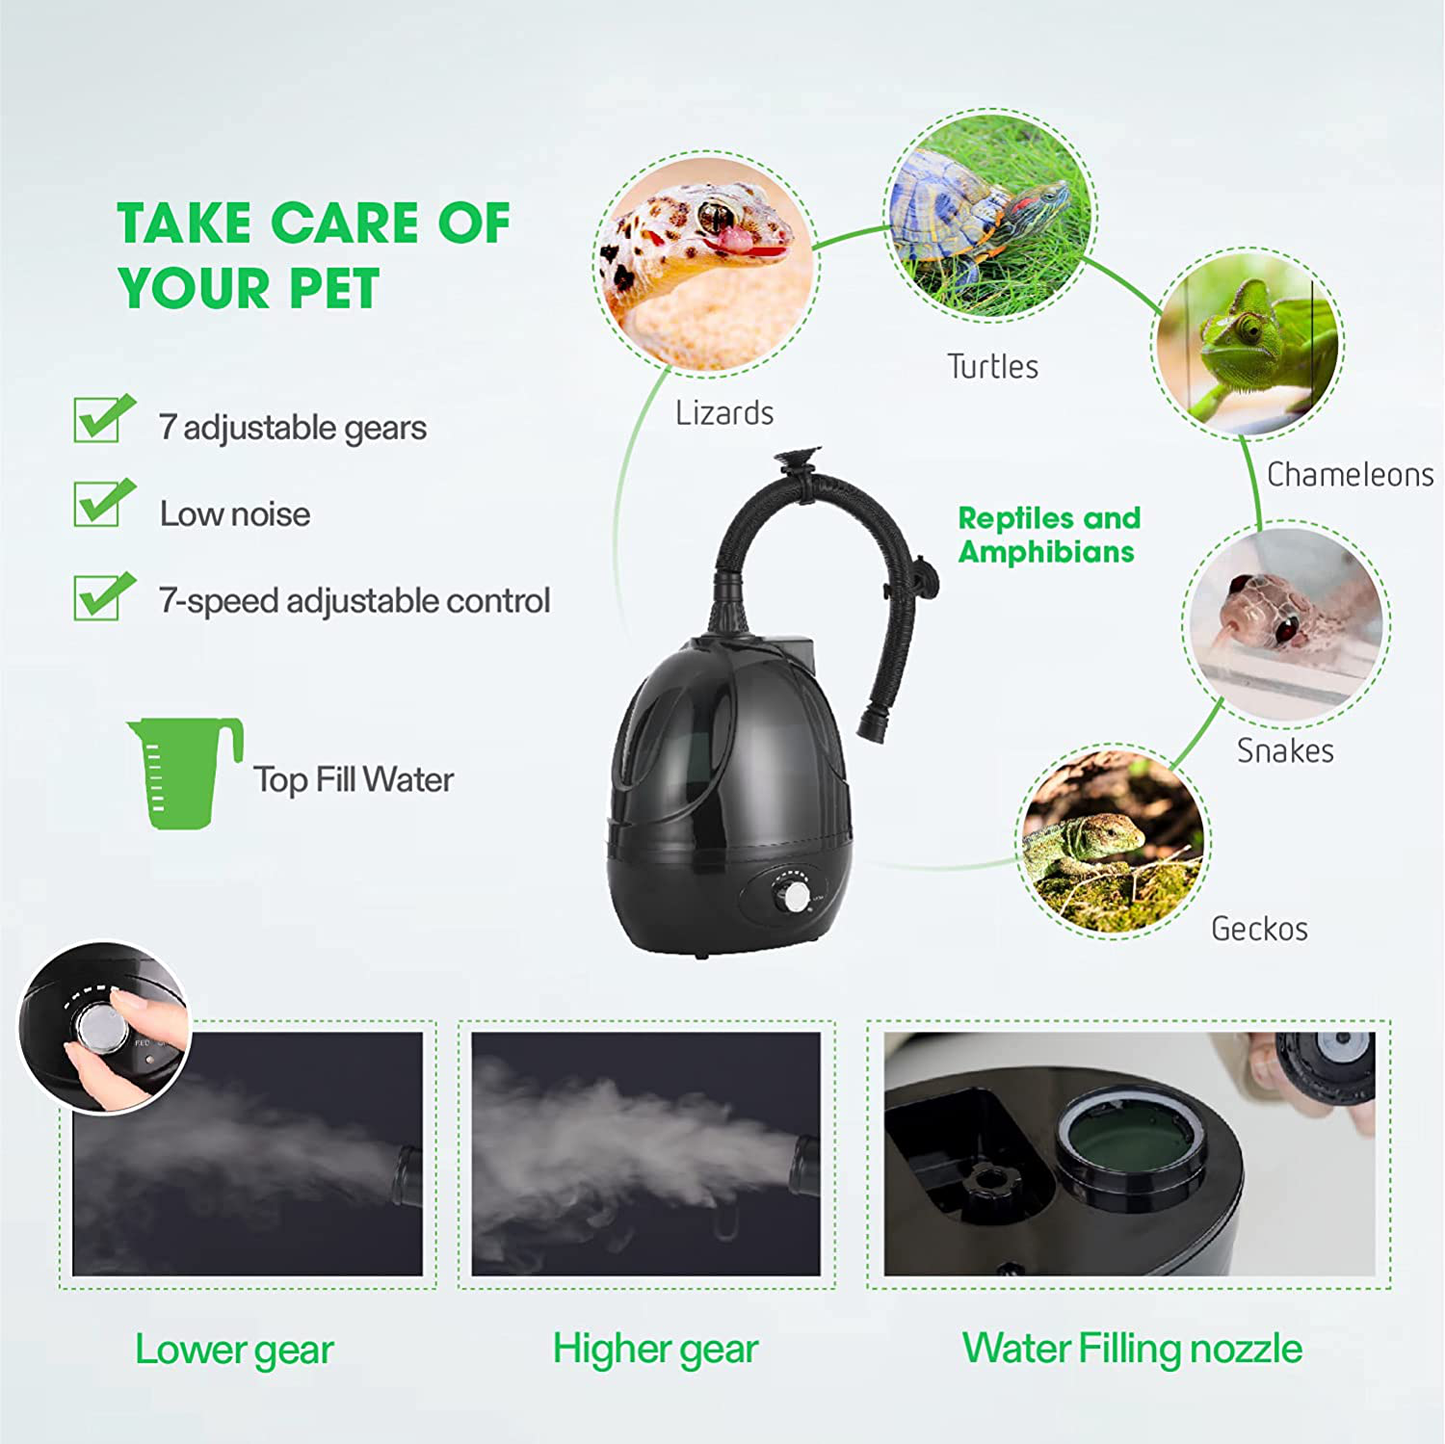 VIVOSUN Pet Supplies Reptile Humidifier - Mister Fogger Terrariums Humidifier Extremely High Pressure Silent Pump Fog Machine for a Variety of Reptiles/Amphibians